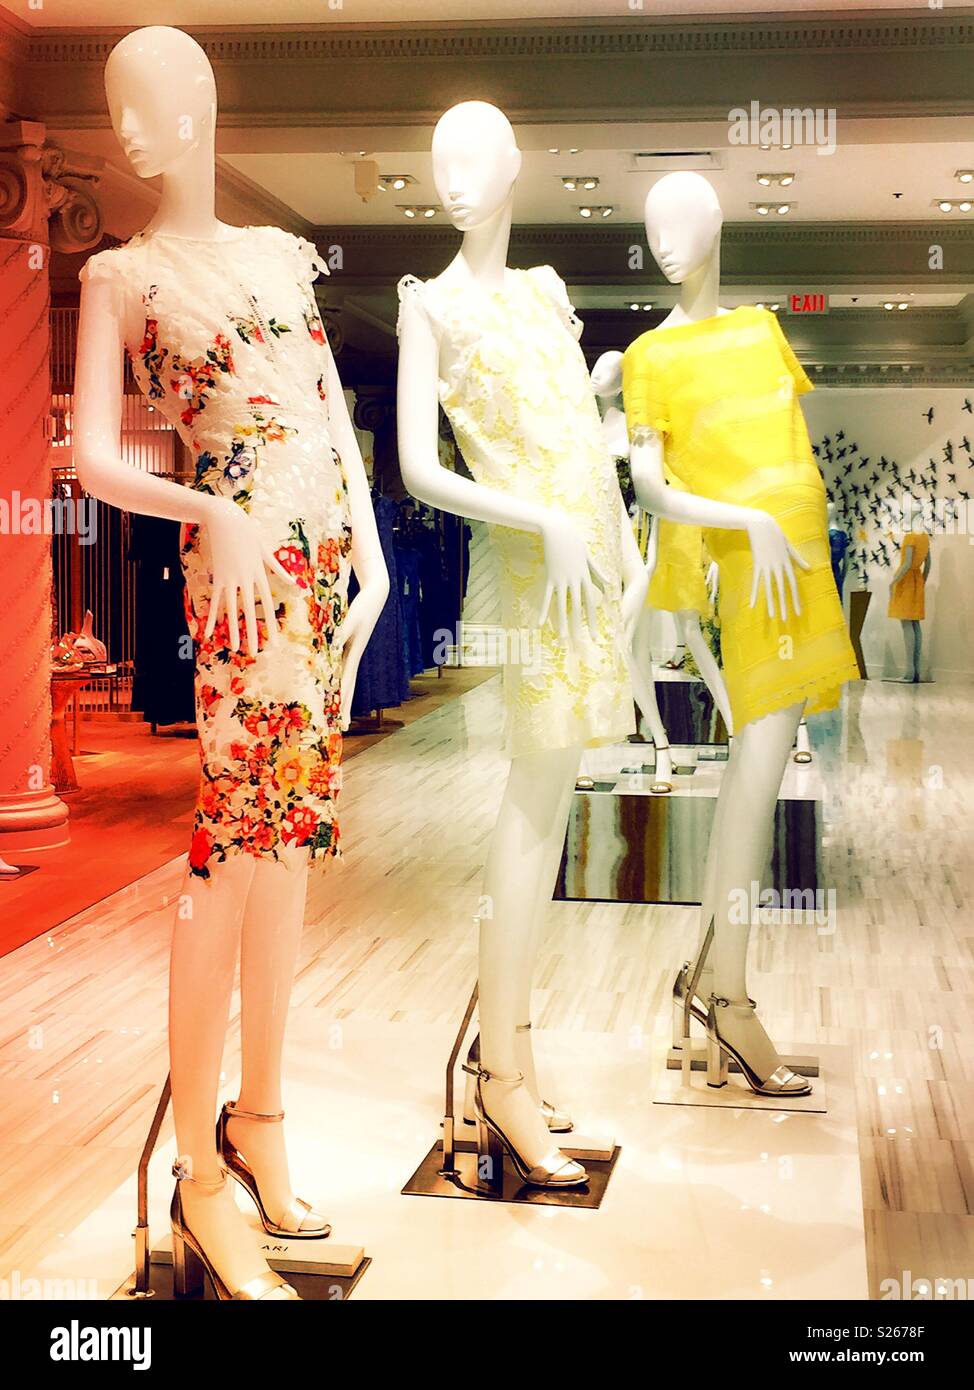 Mannequins in fashionable clothing, lord and Taylor department store, NYC, USA Stock Photo